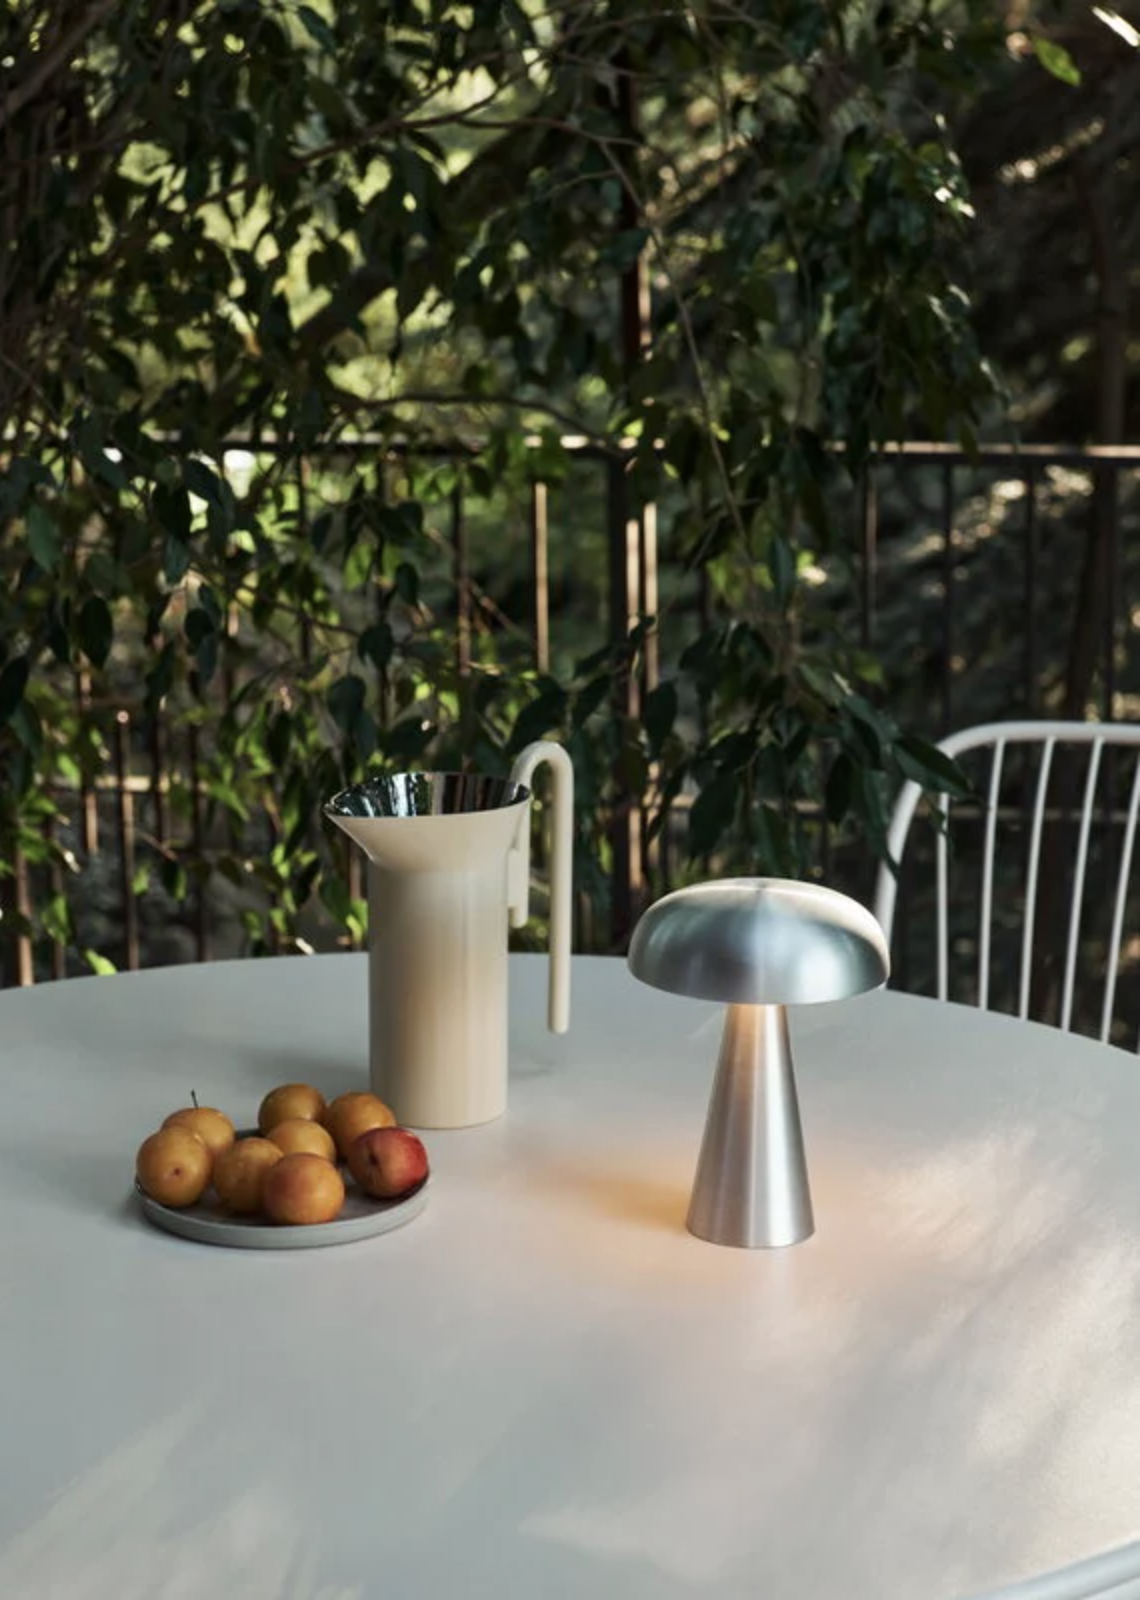 Portable Como SC53 lamp by &tradtion used in the garden since its portable